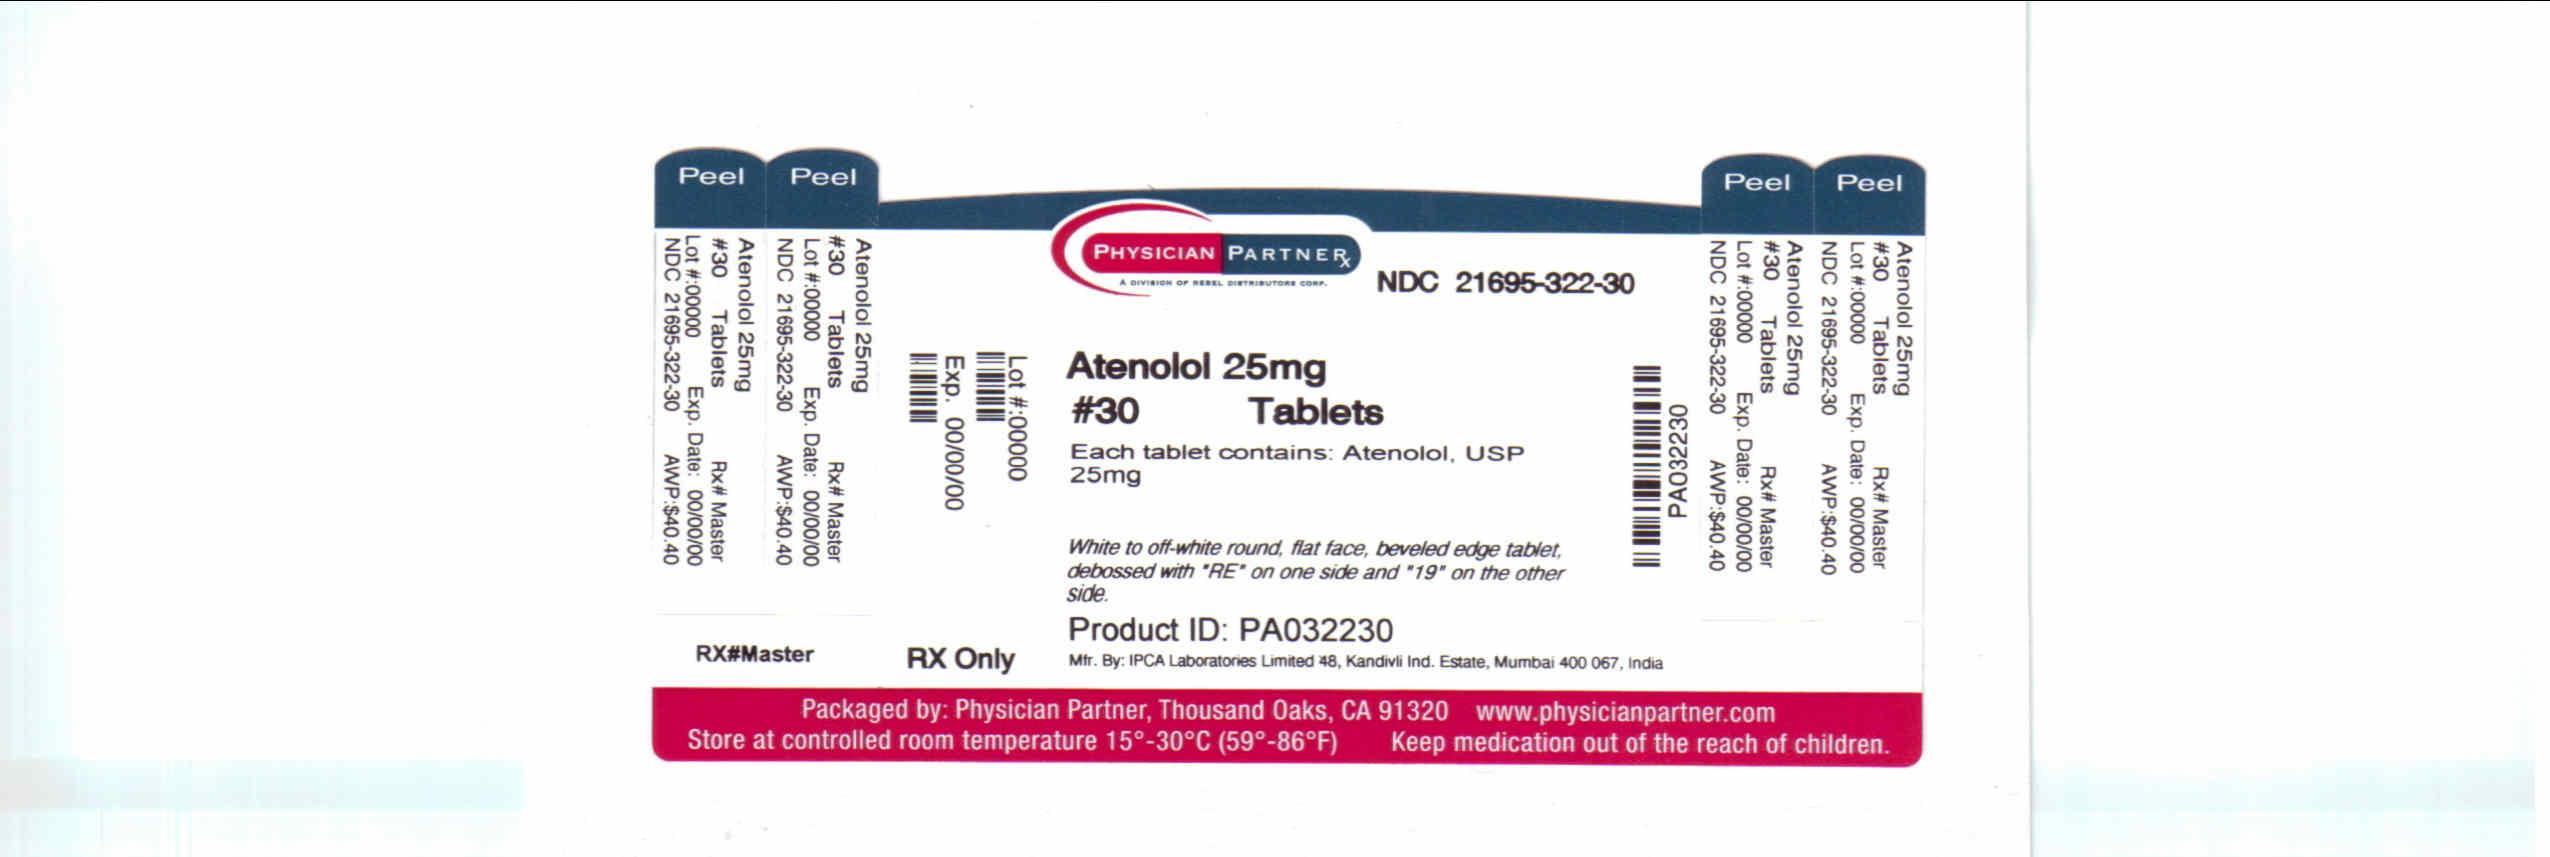 Atenolol Package Label